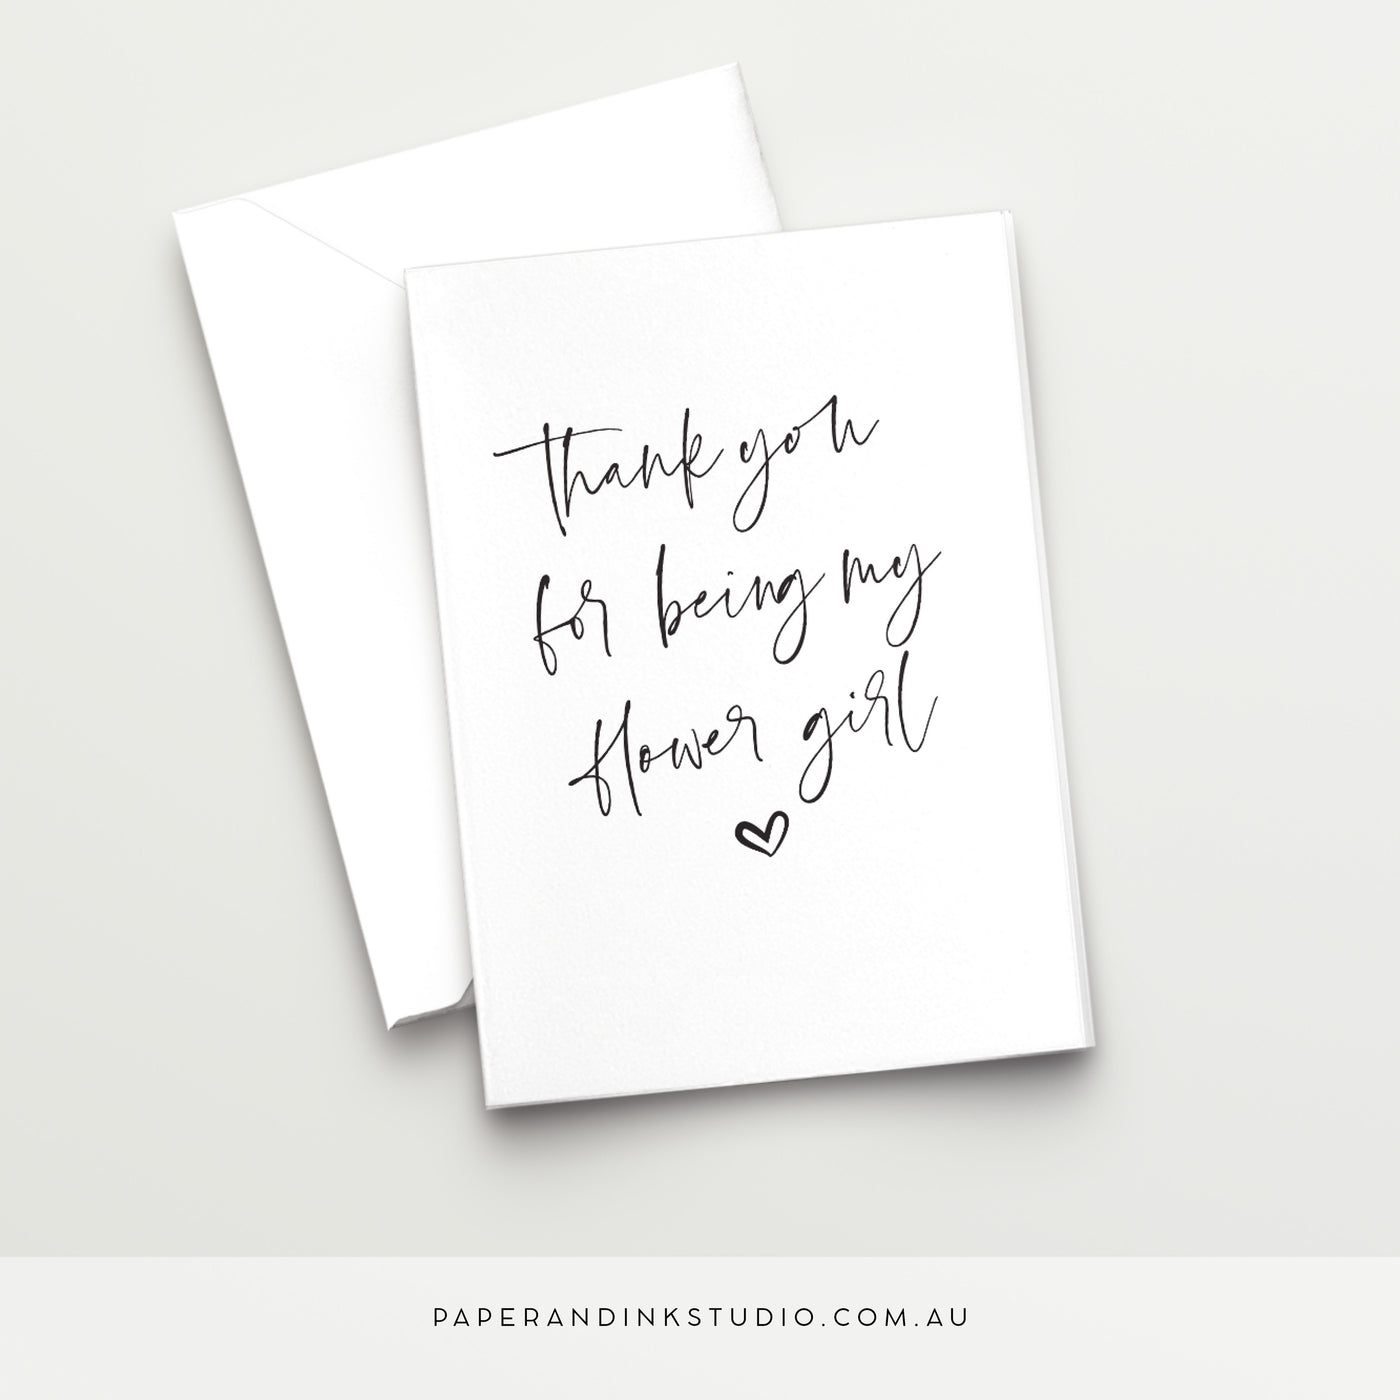 A white folded wedding card in a design called Thorne with black writing that says thank you for being my flower girl, to give to your flower girl on or after your wedding day.